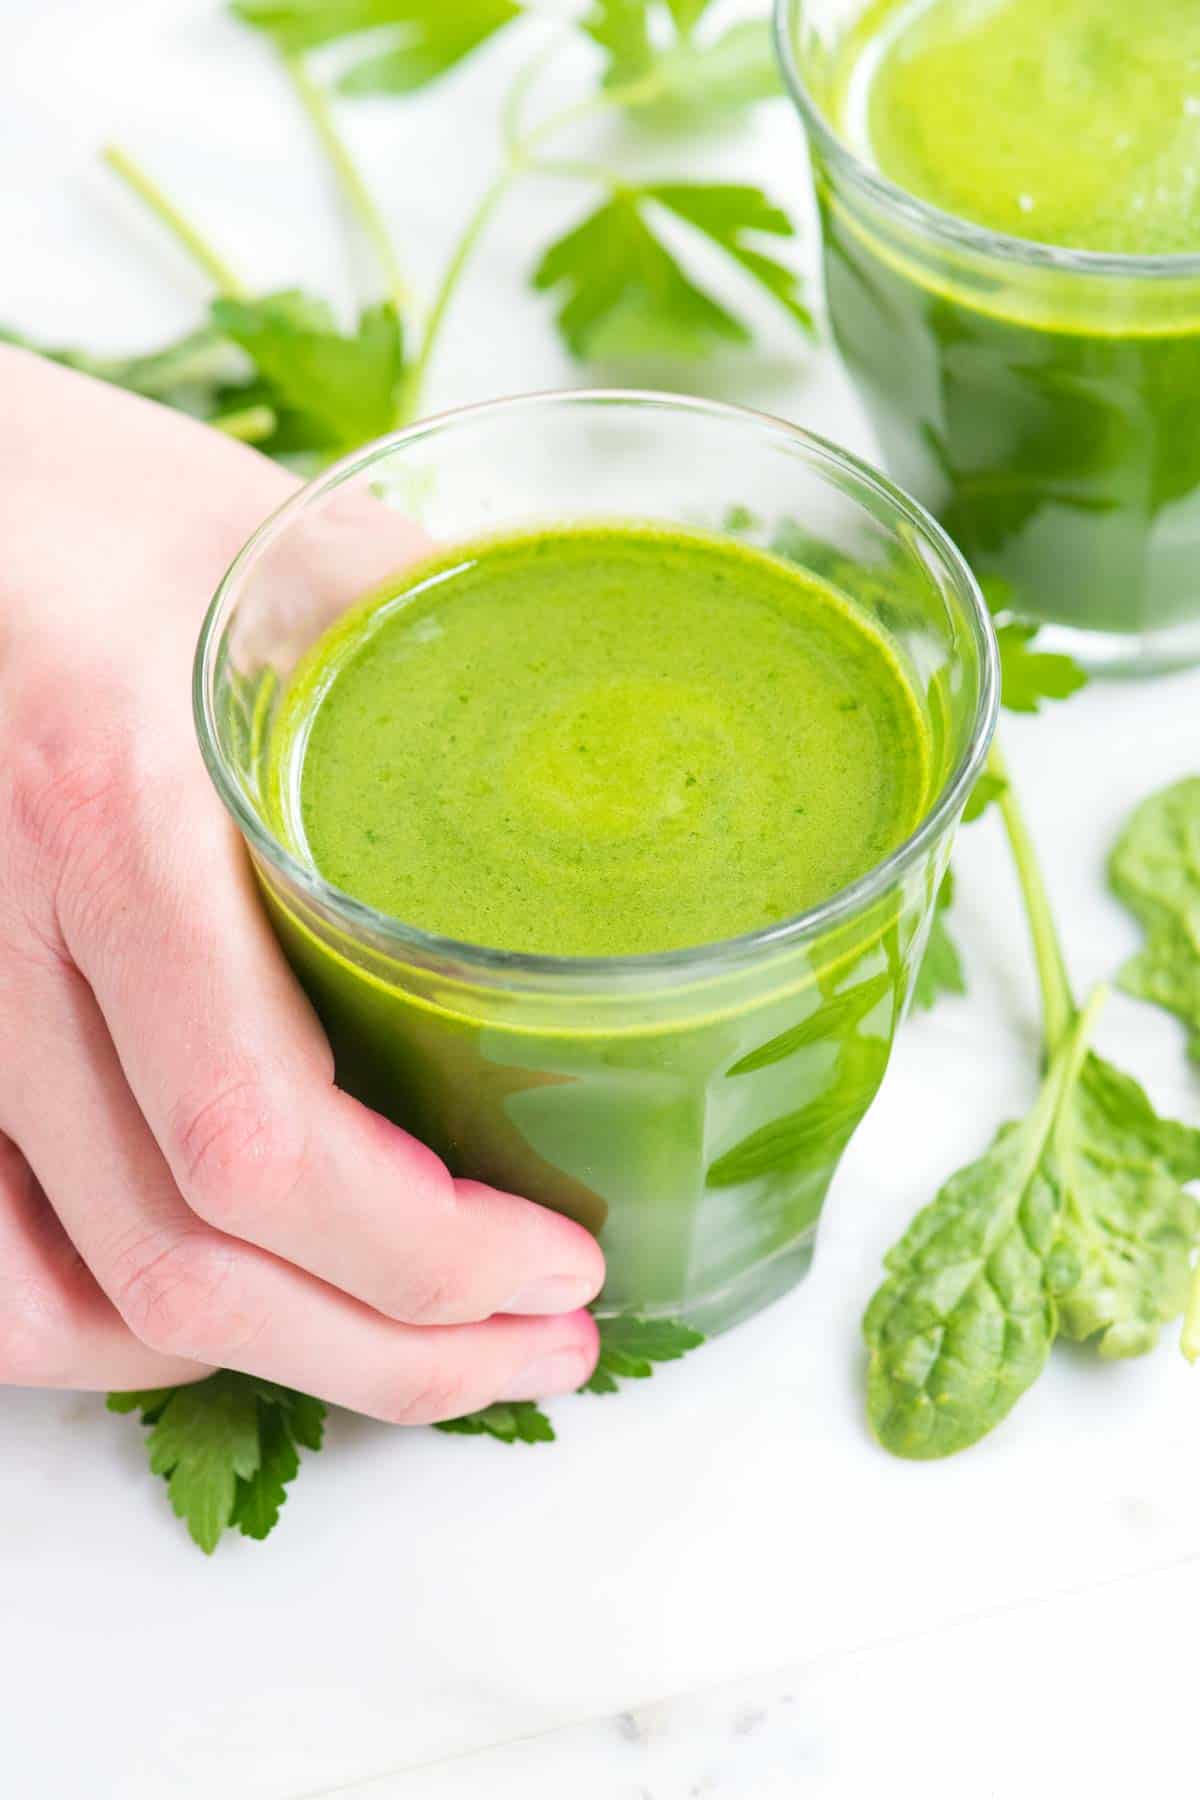 How To Make A Detox Juice? 